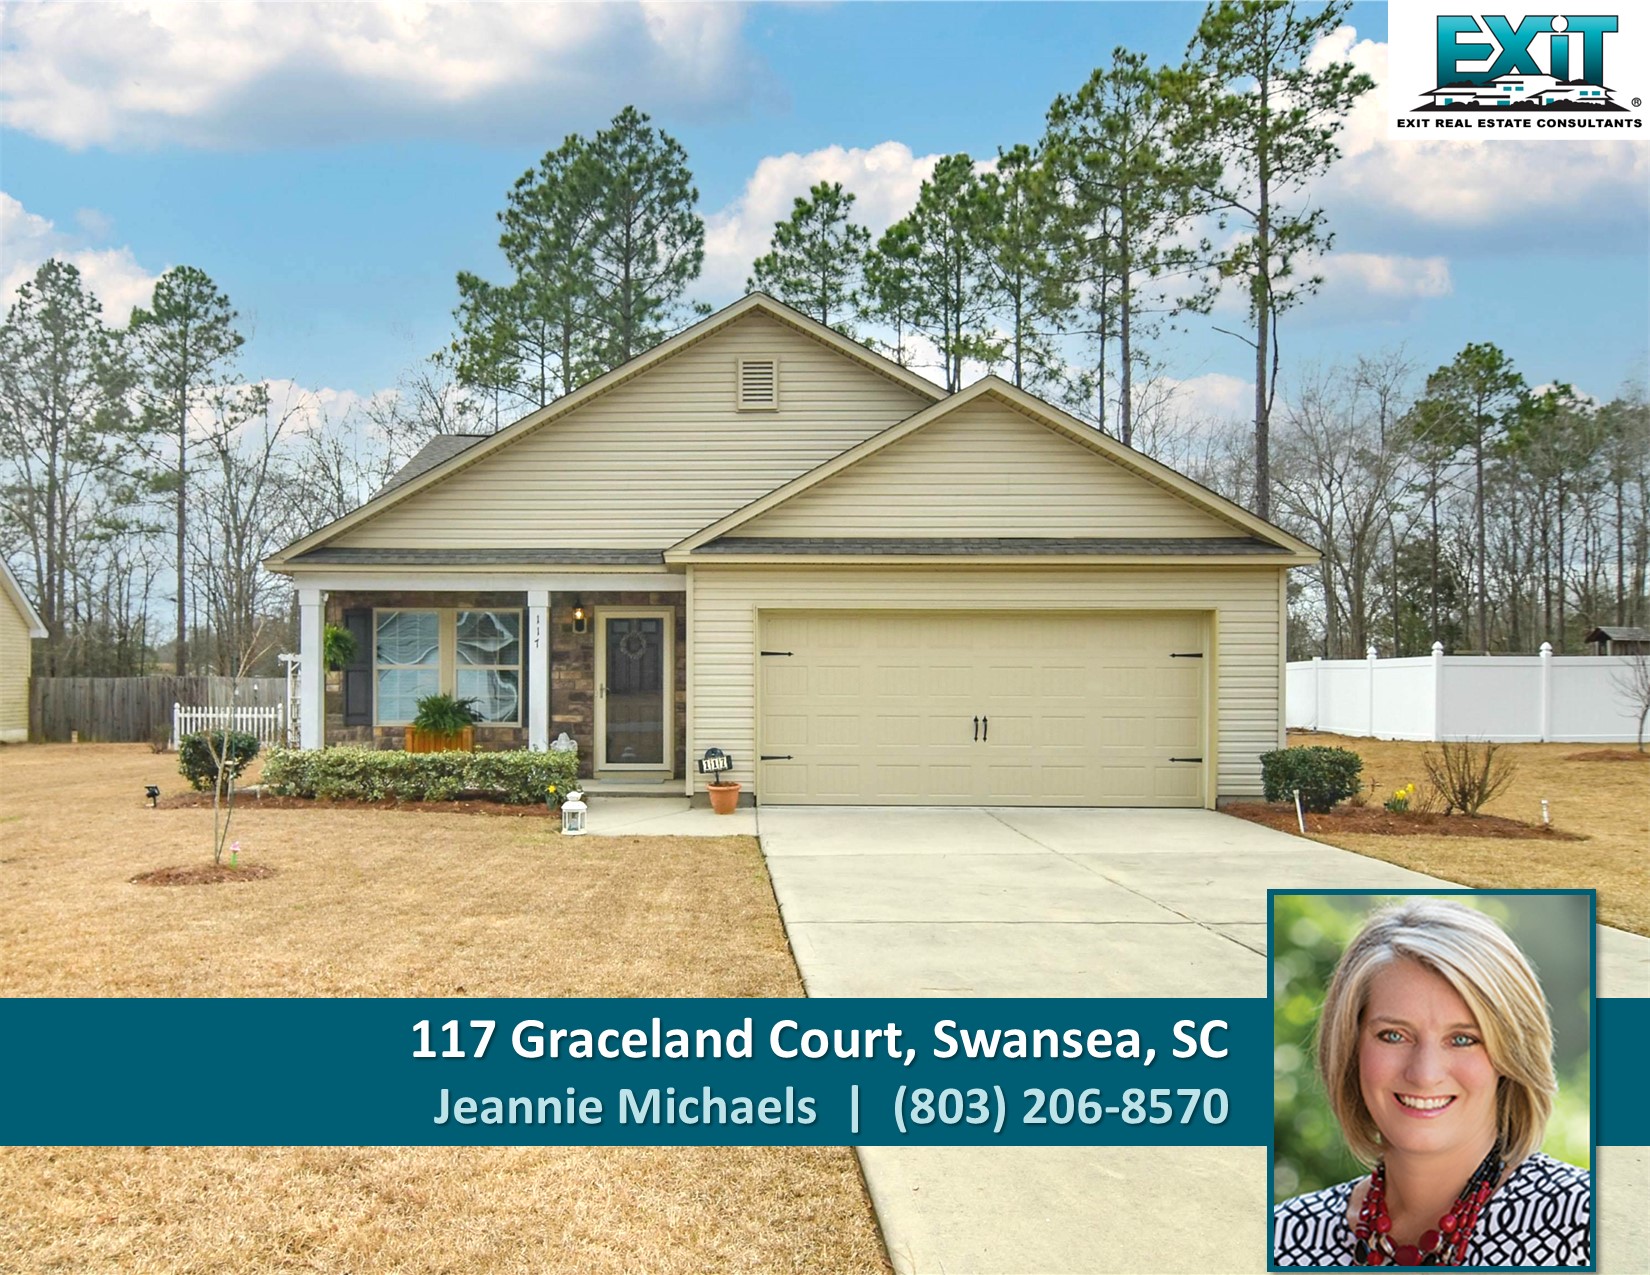 Just listed in Graceland - Swansea